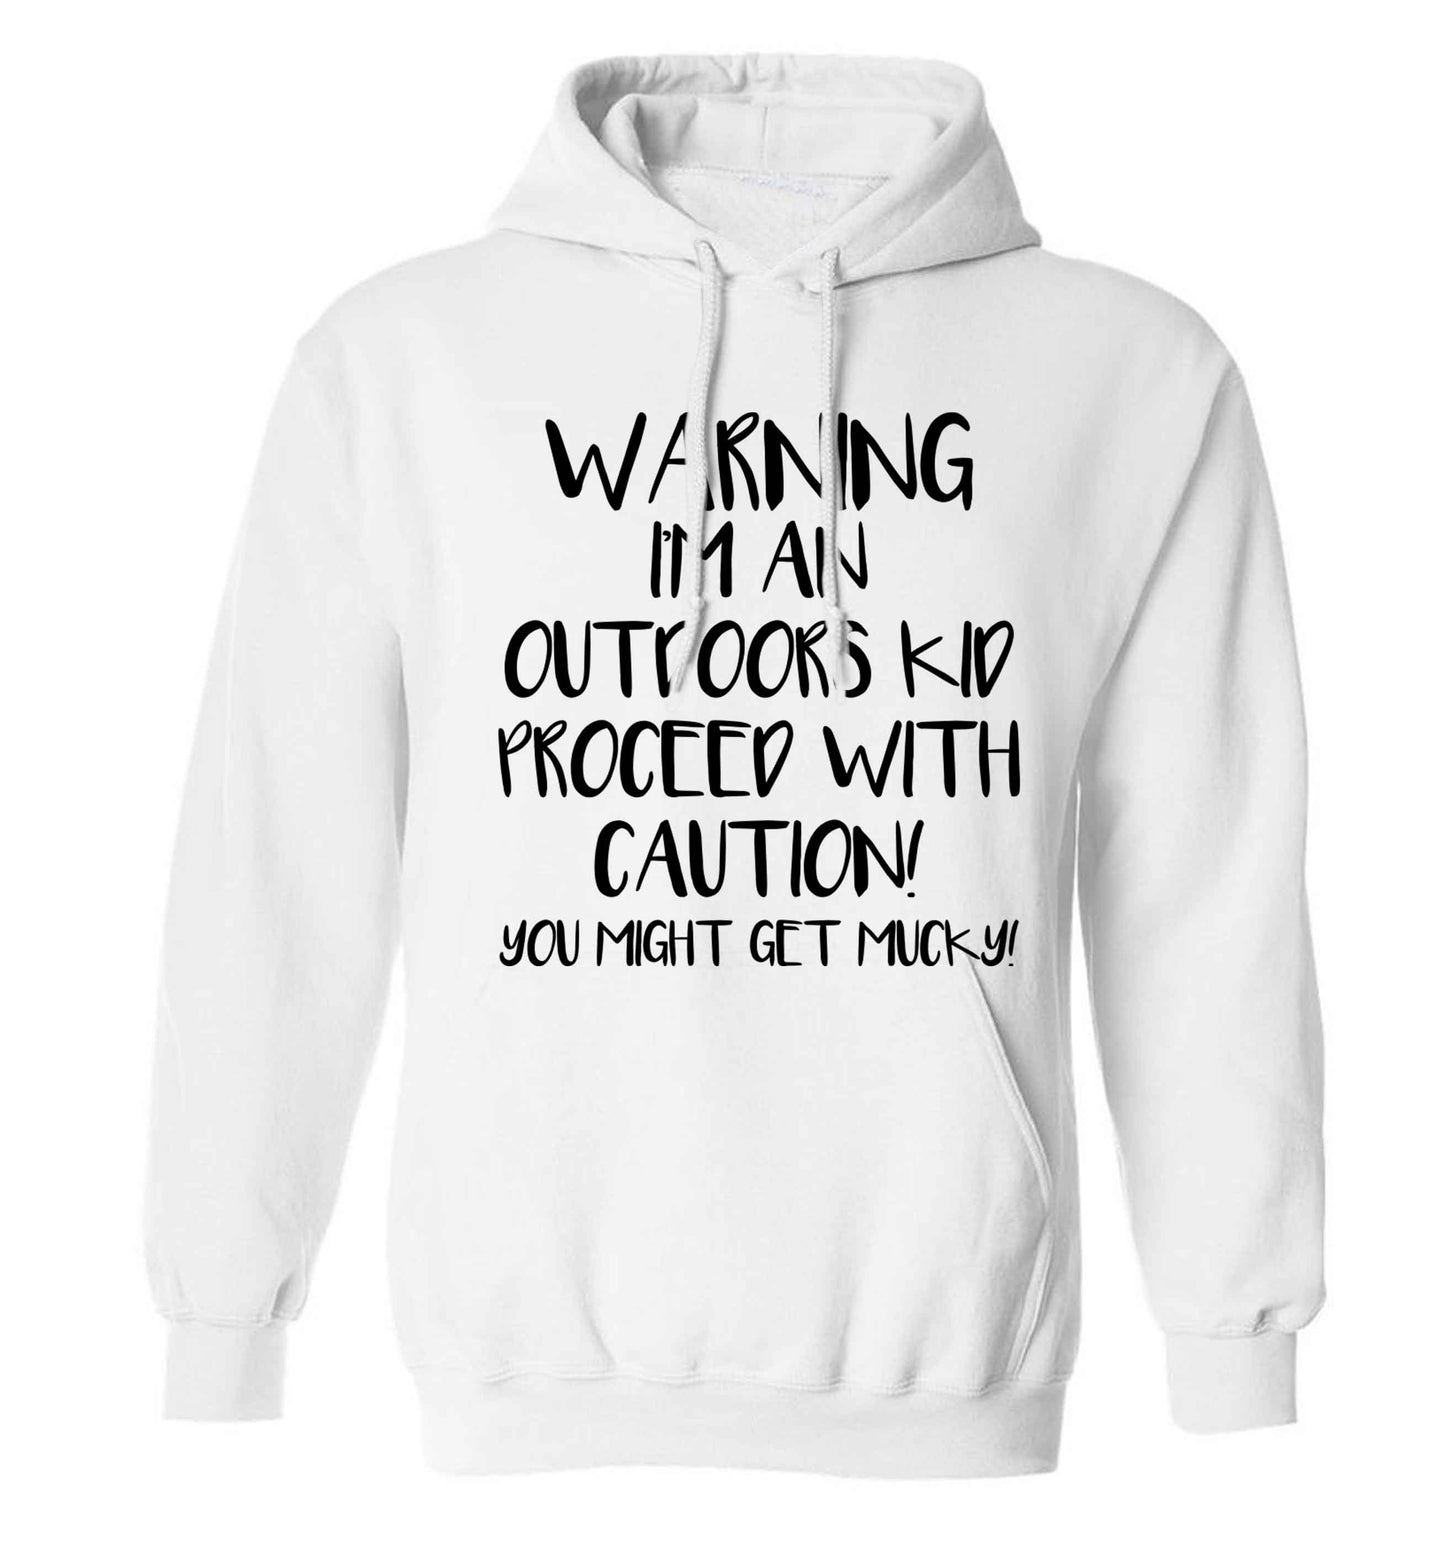 Warning I'm an outdoors kid! Proceed with caution you might get mucky adults unisex white hoodie 2XL